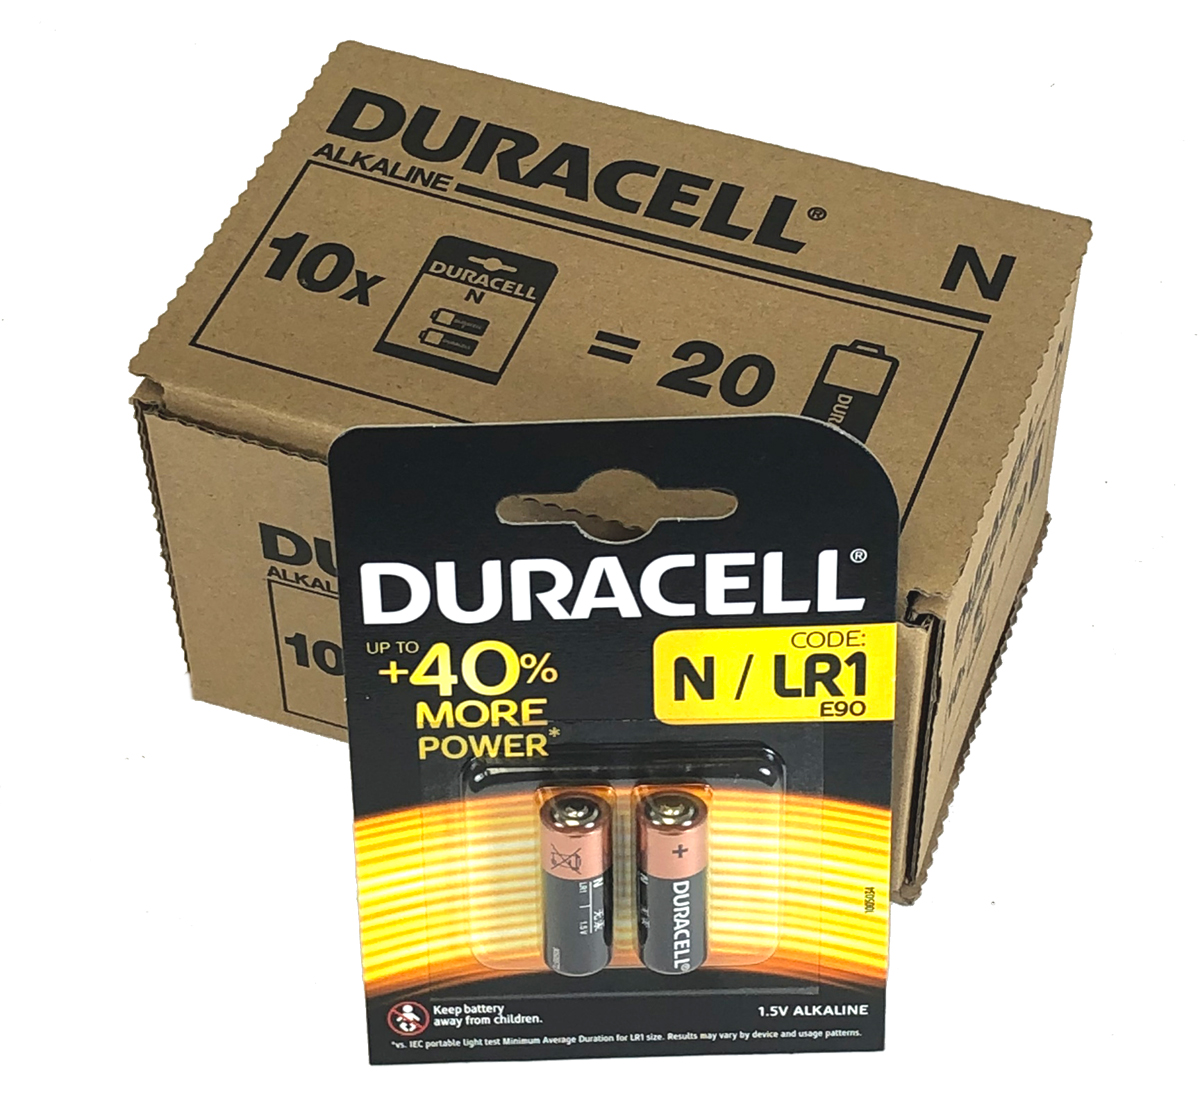 Duracell Batteries MN9100 N LR1 Battery Pack of 20